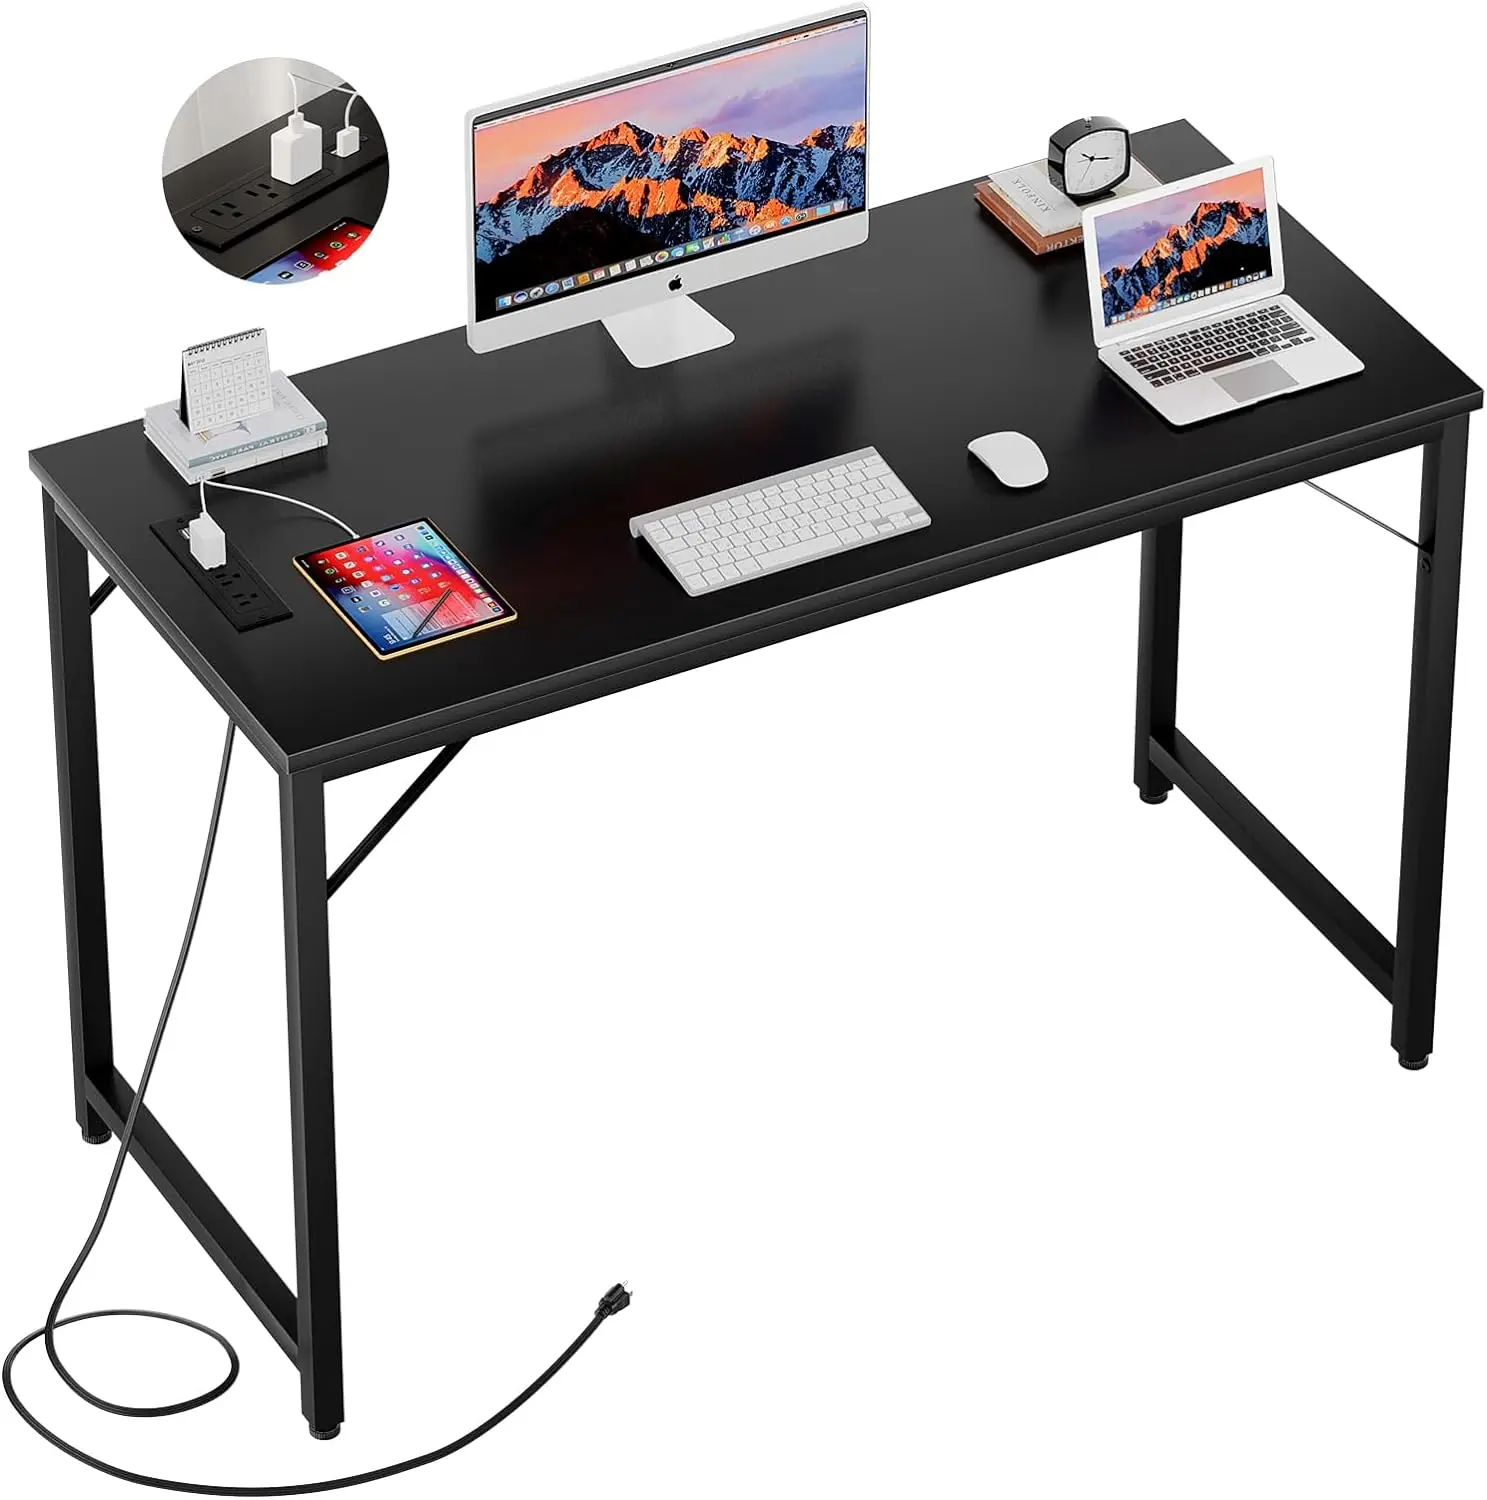 47 Inch Computer Desk with Magic Power Outlets, Modern Office Desk with USB Charging Ports, Sturdy Student Writing Desk 4 books sank magic new copybook reusable groove writing practice book calligraphy wipe free english german early education